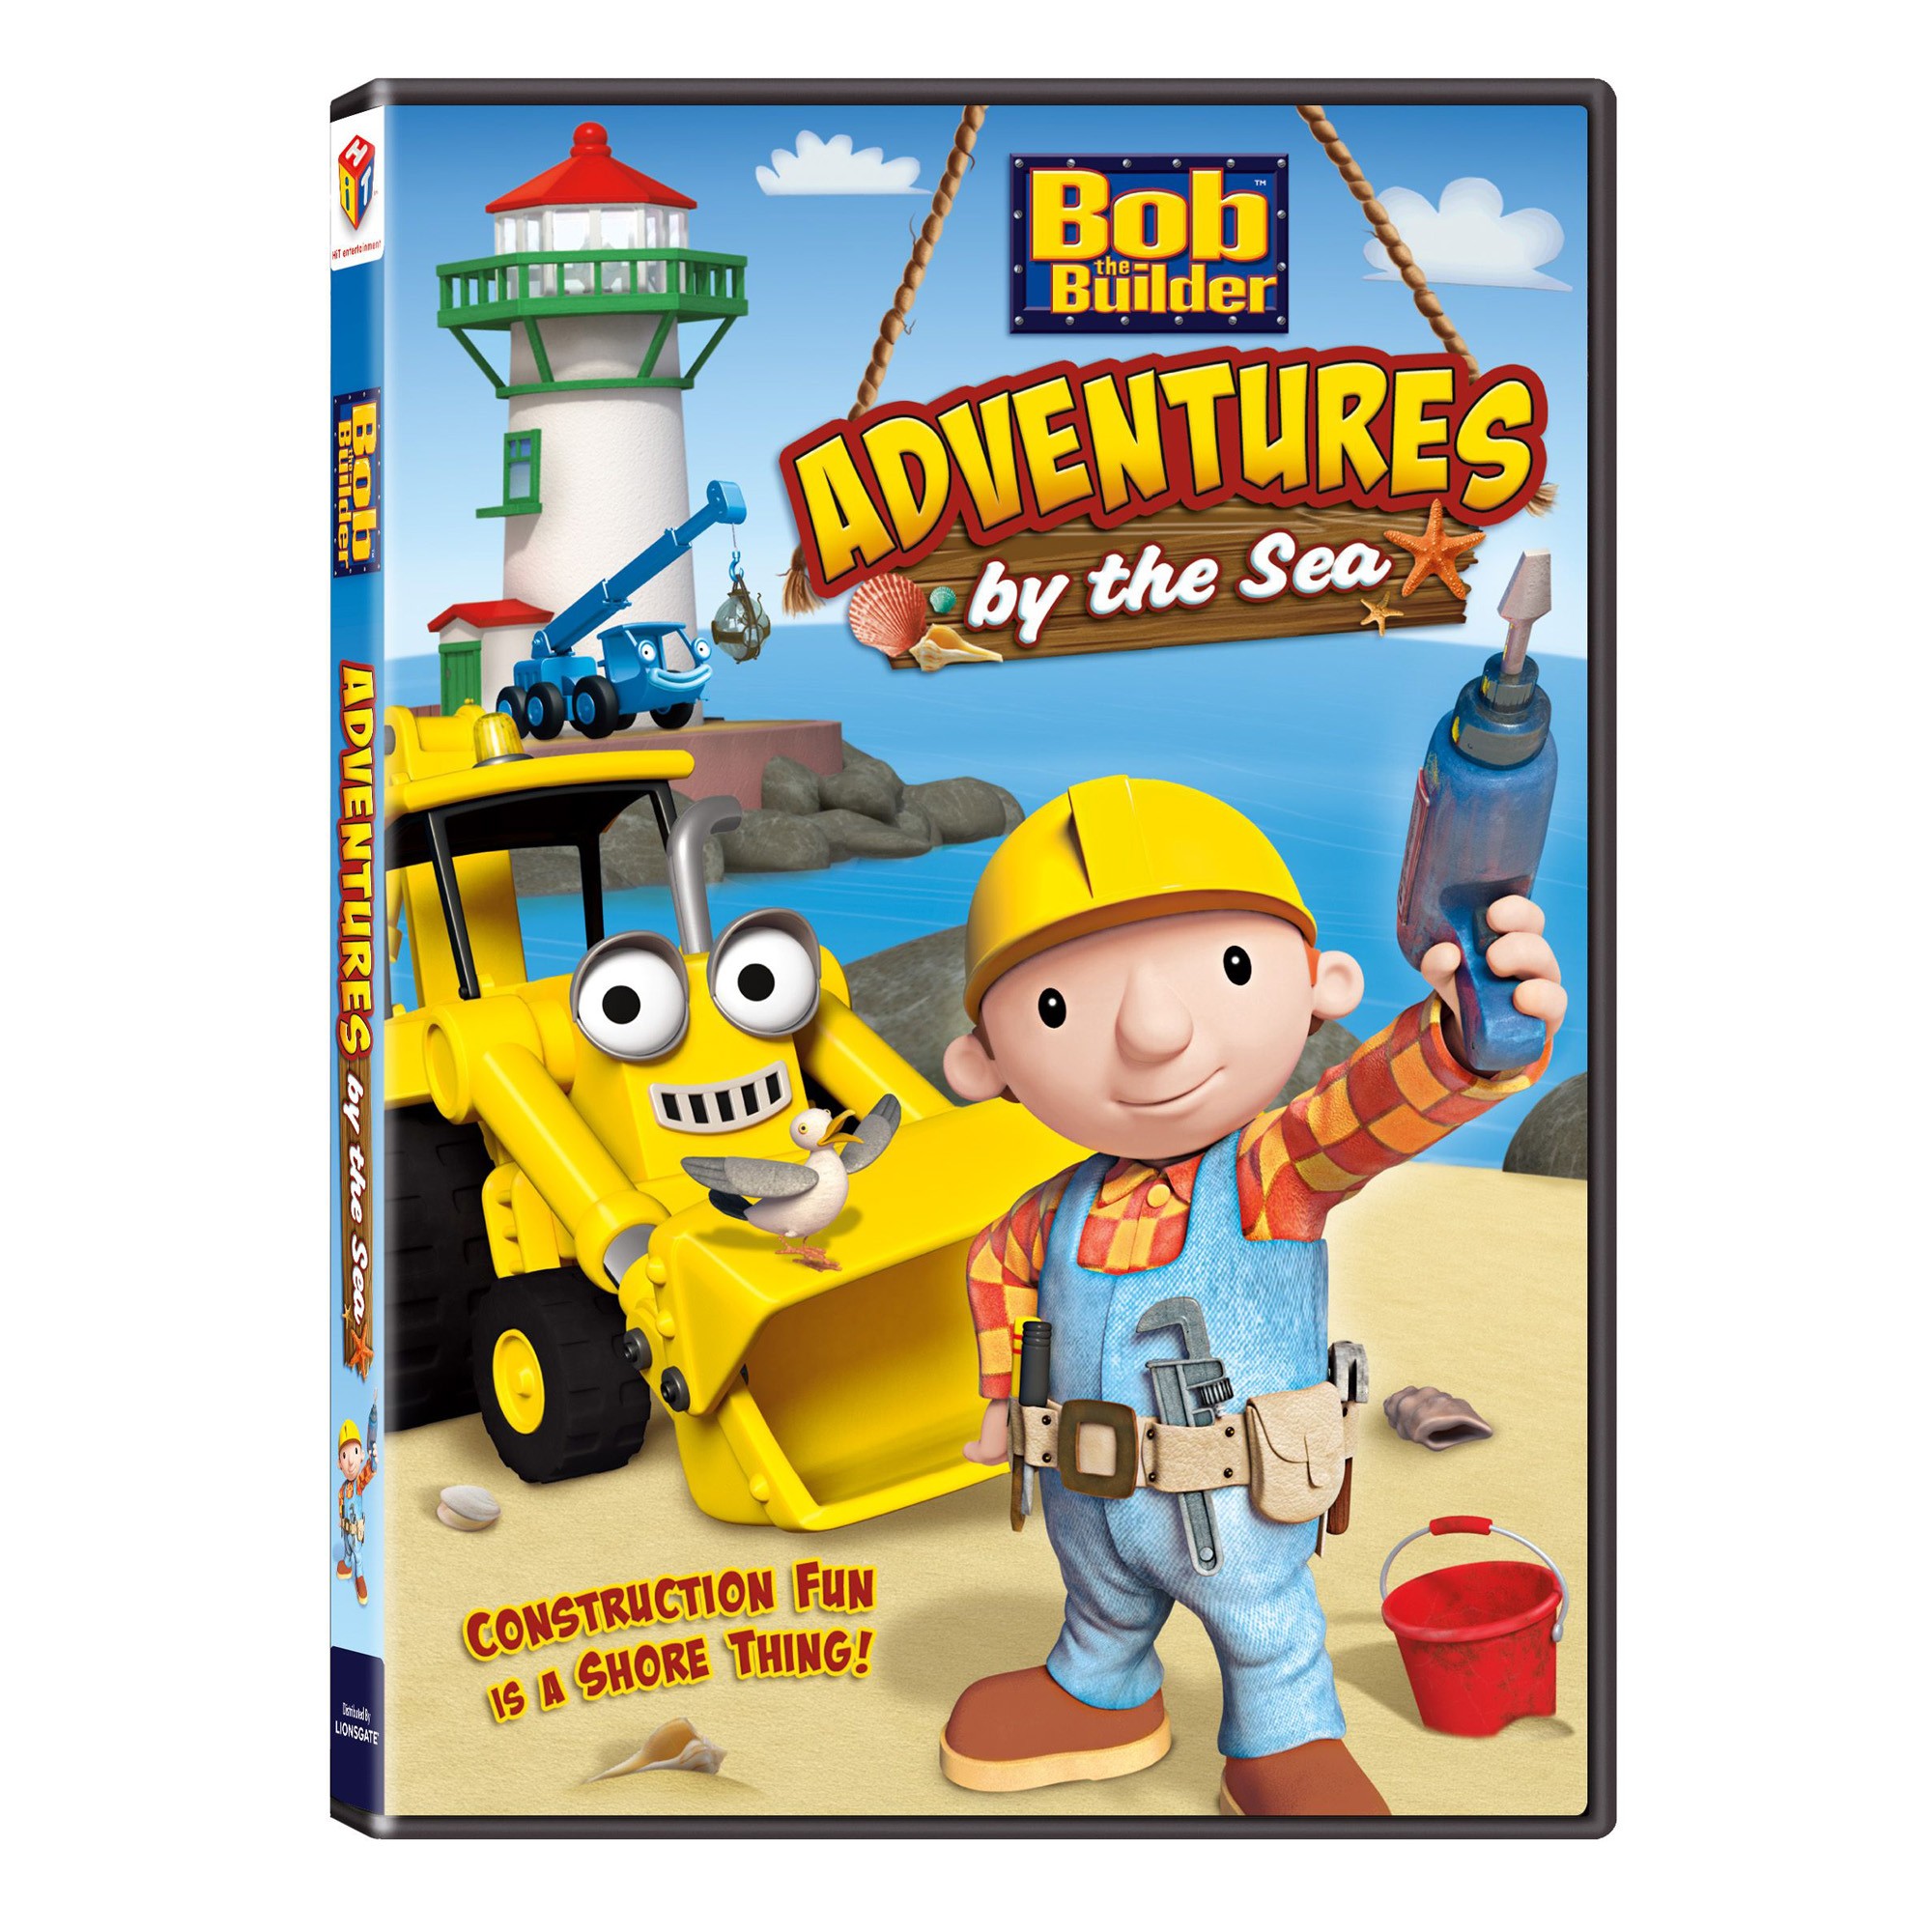 Bob the Builder: Adventures by the Sea DVD. gets Bragging Rights! 